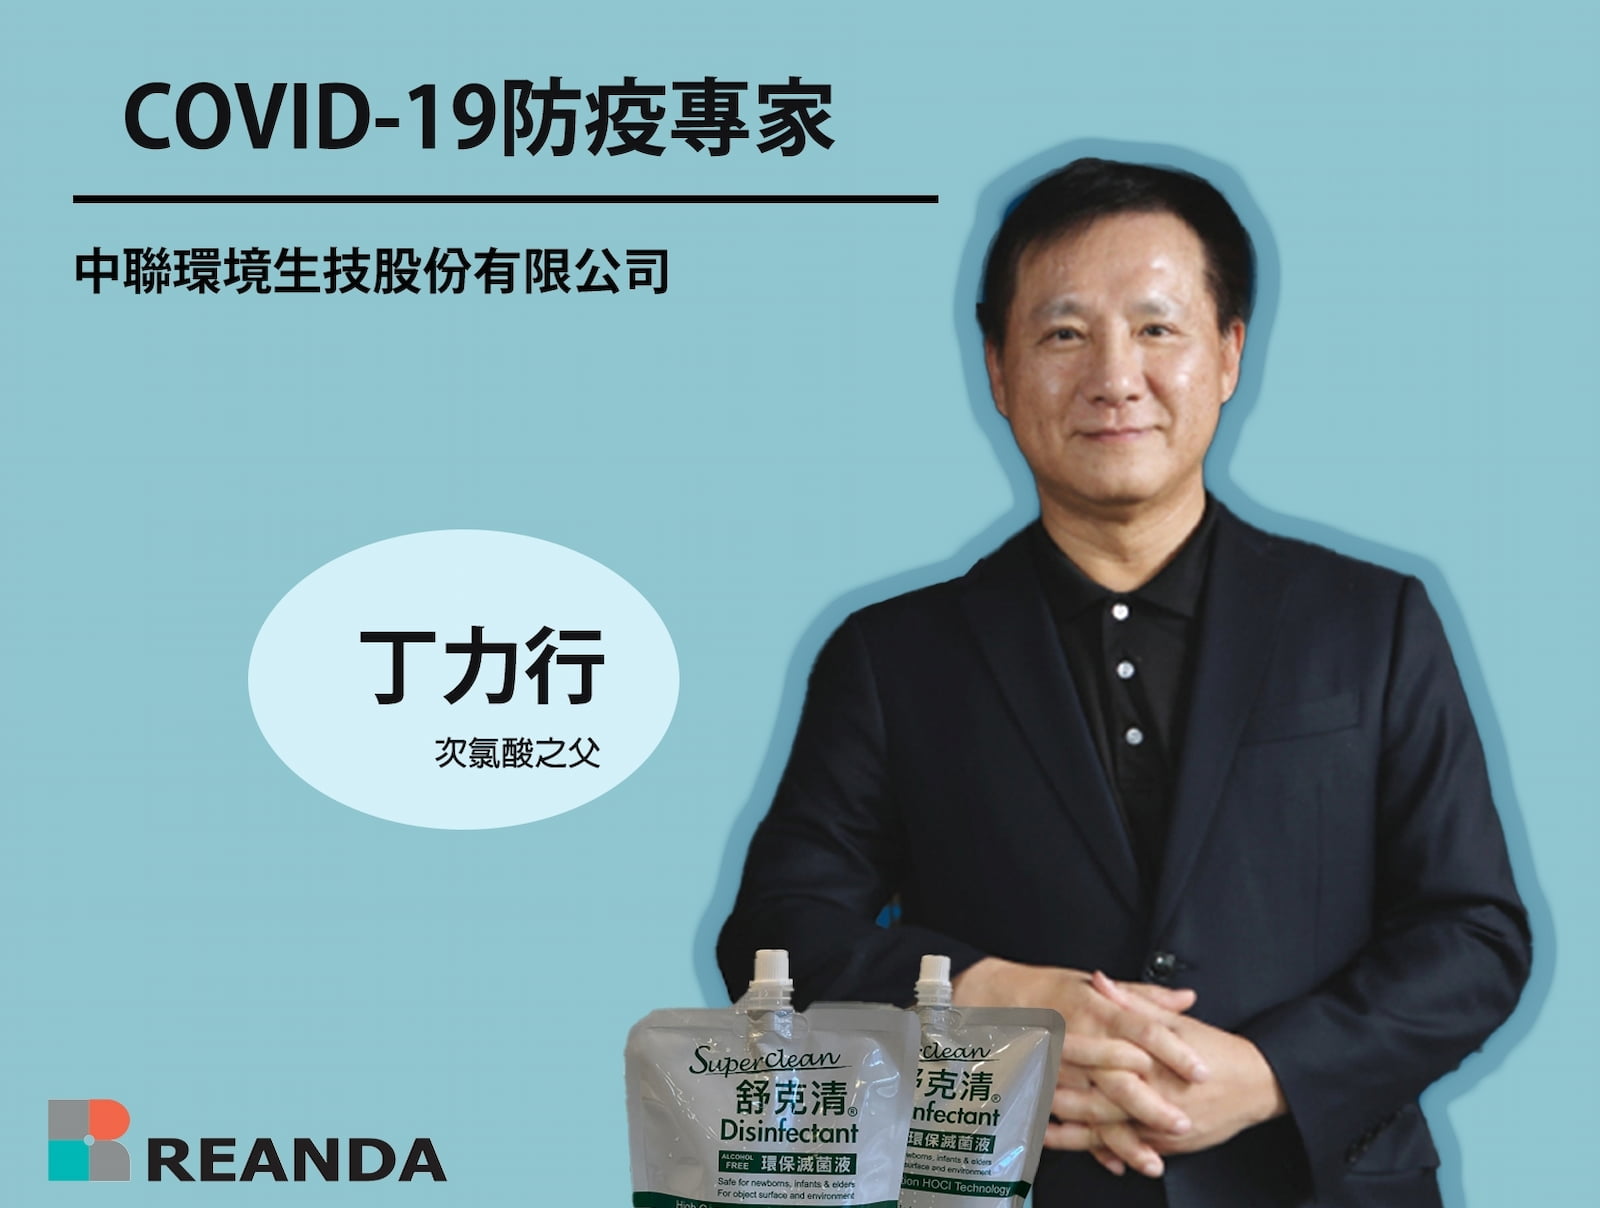 Superclean Founder – Dr. Ding Lixing